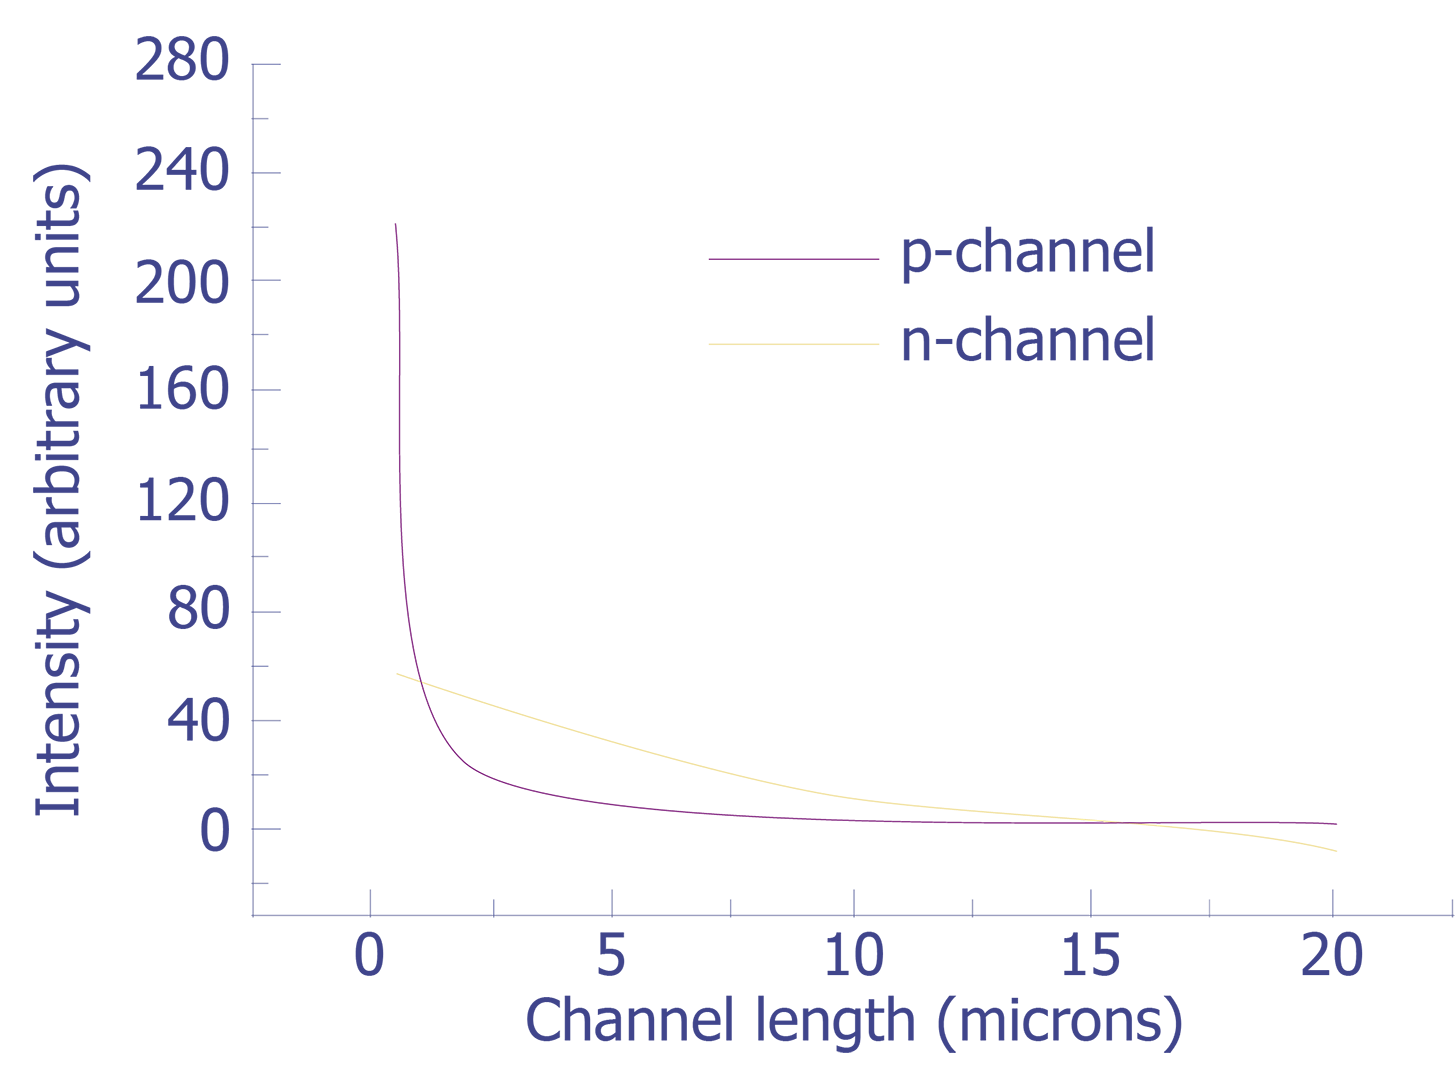 Comparison of spectra from n- and p-channel MOSFETs in saturation versus channel length over spectral range from 1.1 to 1.4 µm.